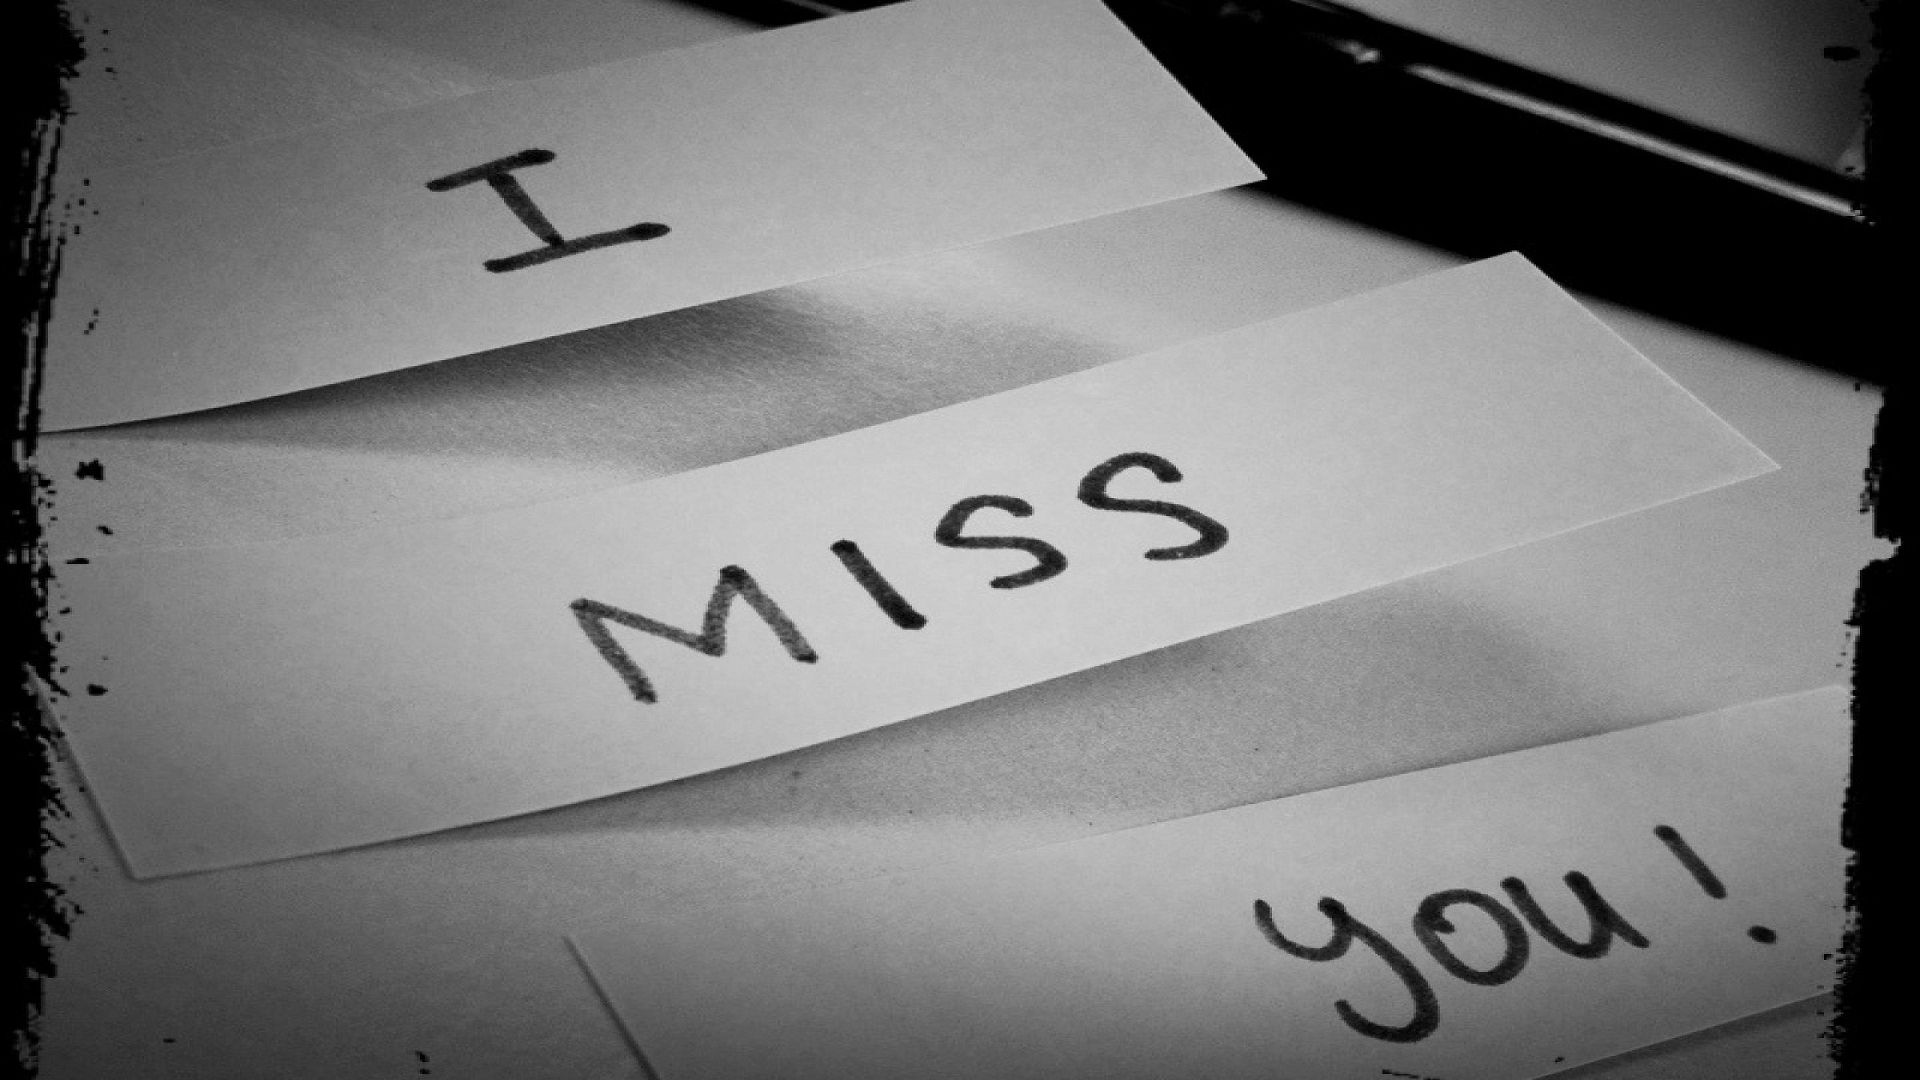 Desktop Wallpaper I Miss You Saying To Deep Love Of Lover, Hd Image,  Picture, Background, 2vo3vn